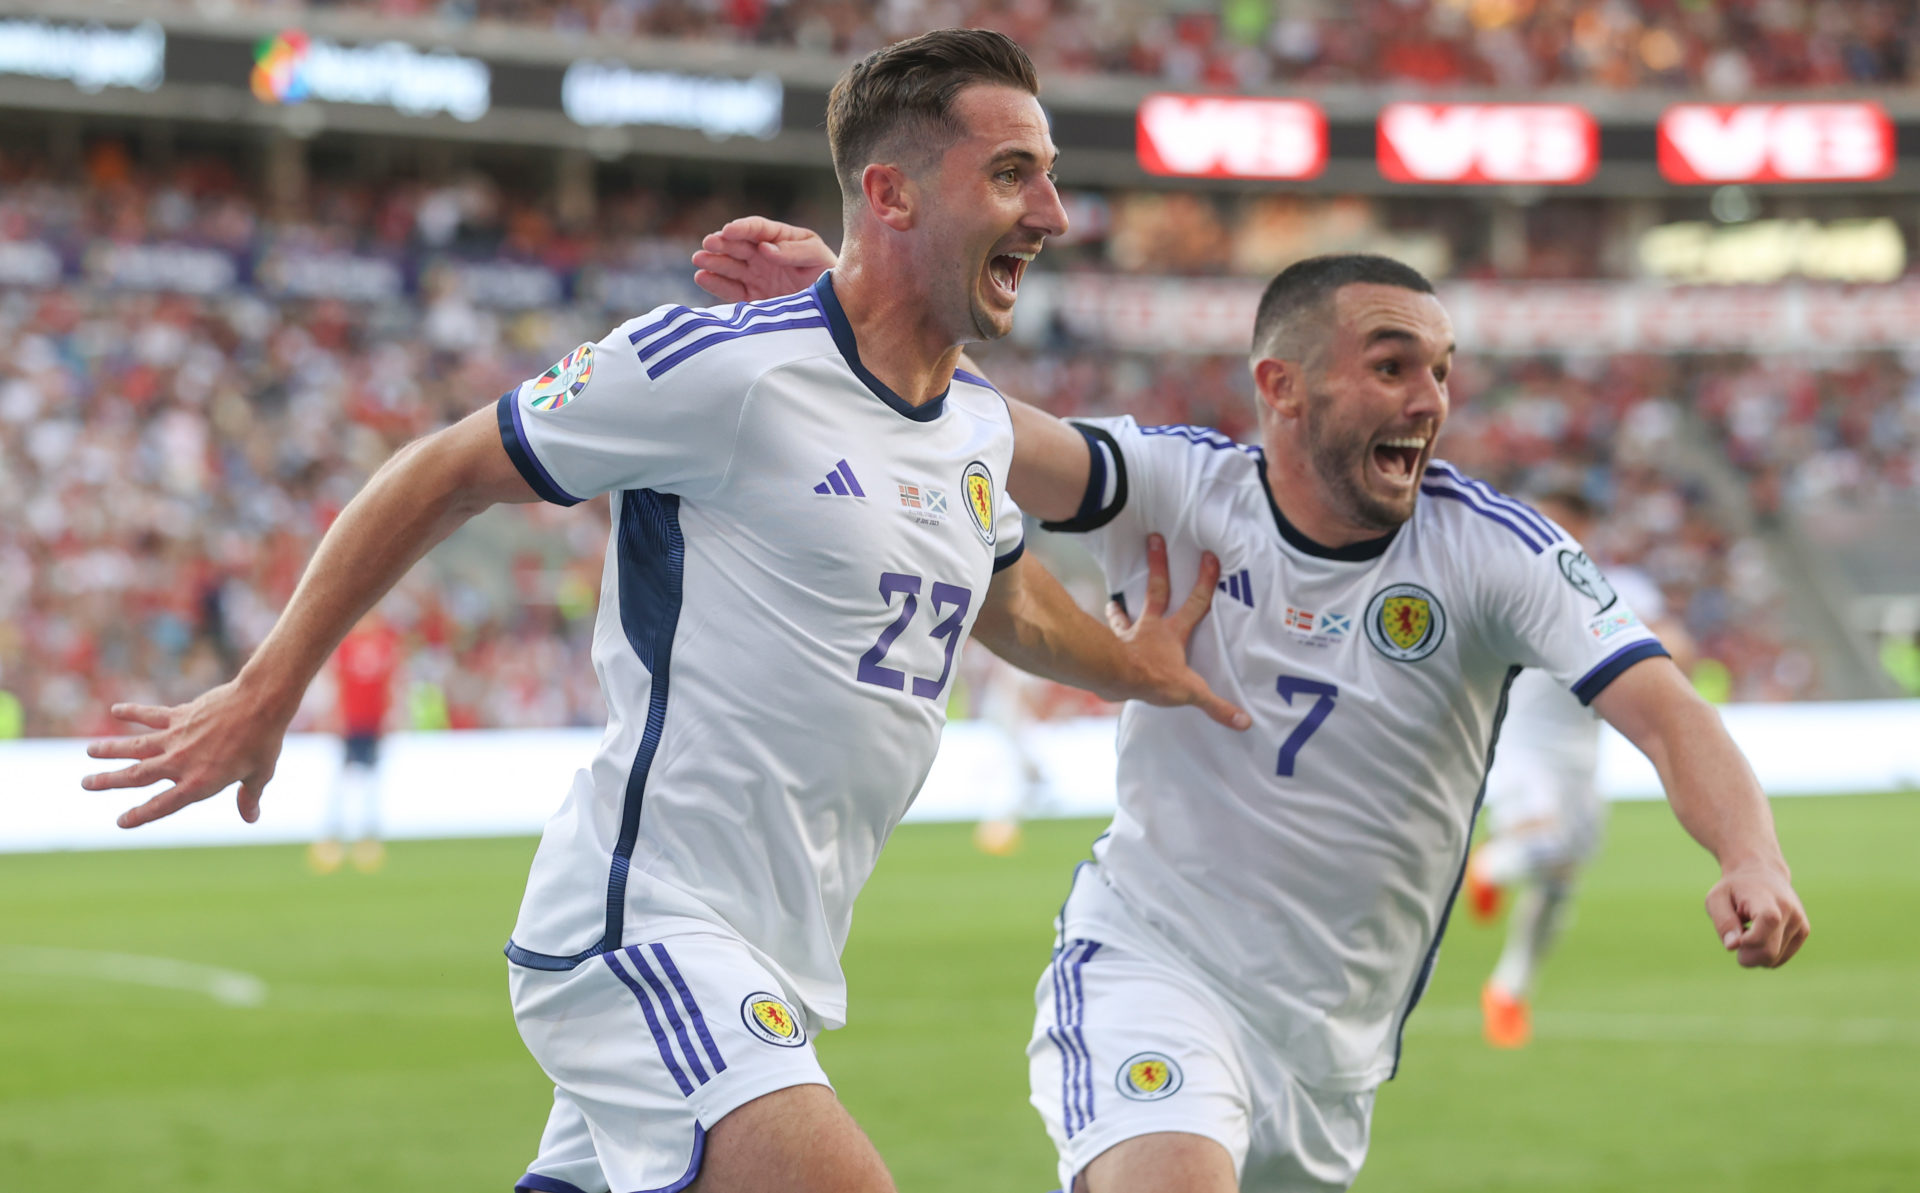 Scotland stun Norway with incredible late comeback to maintain 100% Group A record